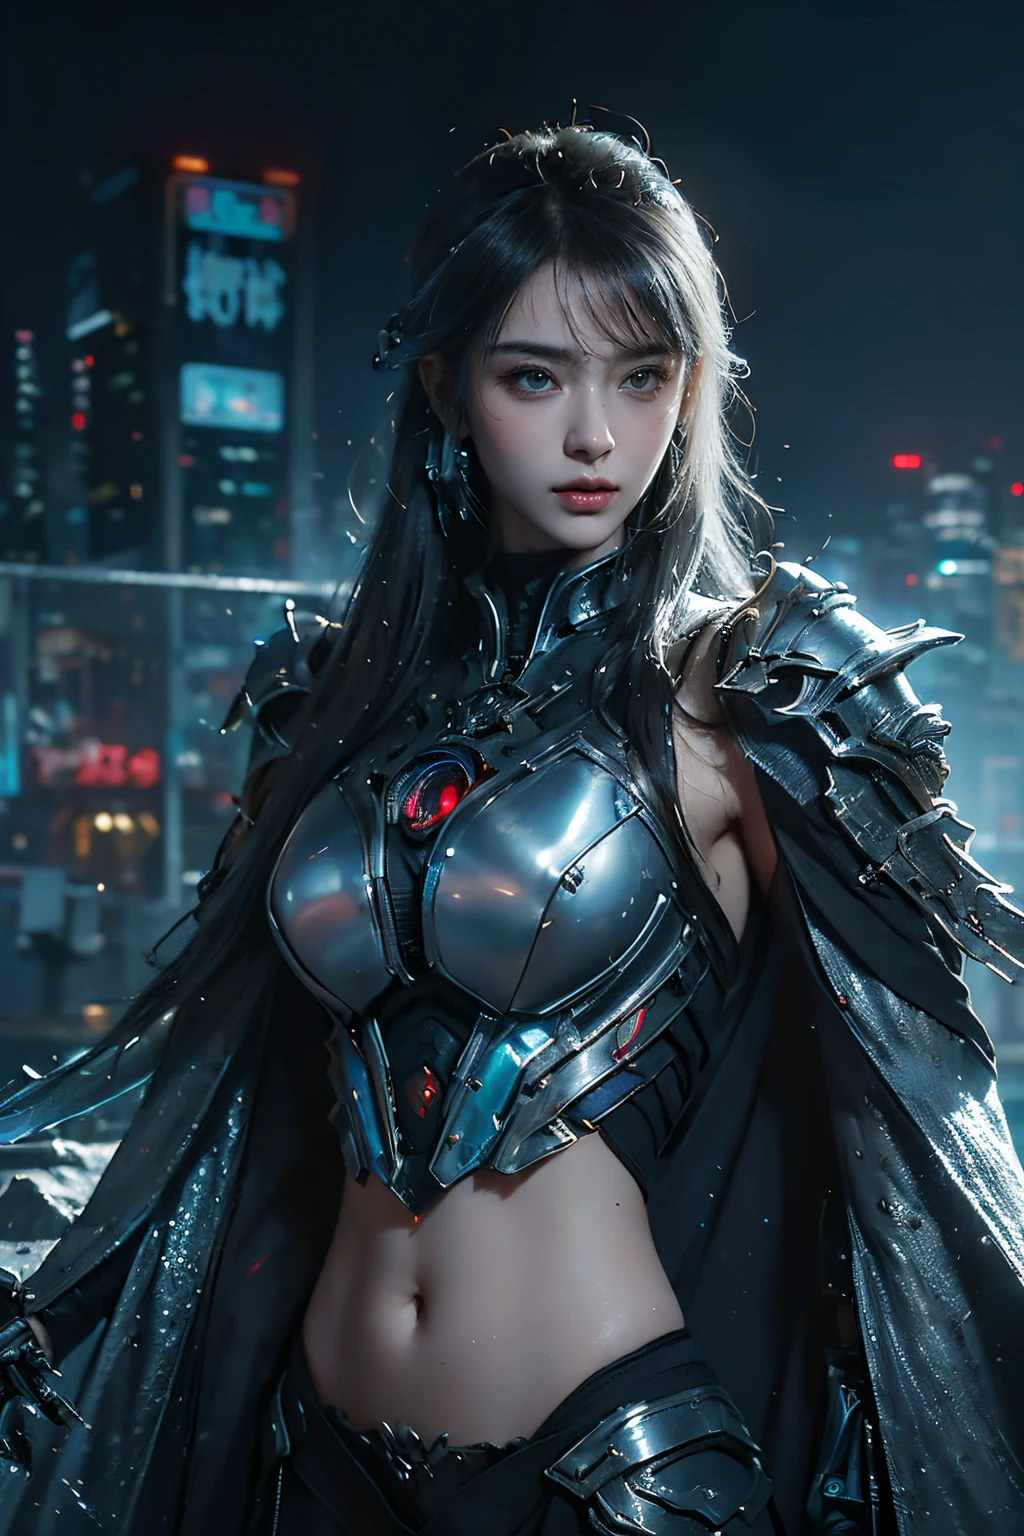 tmasterpiece,Best quality,A high resolution,8K,(Portrait photograph:1.5),(ROriginal photo),real photograph,digital photography,(Combination of cyberpunk and fantasy style),(Female soldier),20-year-old girl,random hair style,By bangs,(Red eyeigchest, accessories,Keep one's mouth shut,elegant and charming,Serious and arrogant,Calm and handsome,(Cyberpunk combined with fantasy style clothing,Openwork design,joint armor,Combat uniformposing your navel,Photo pose,Realisticstyle,gray world background,oc render reflection texture